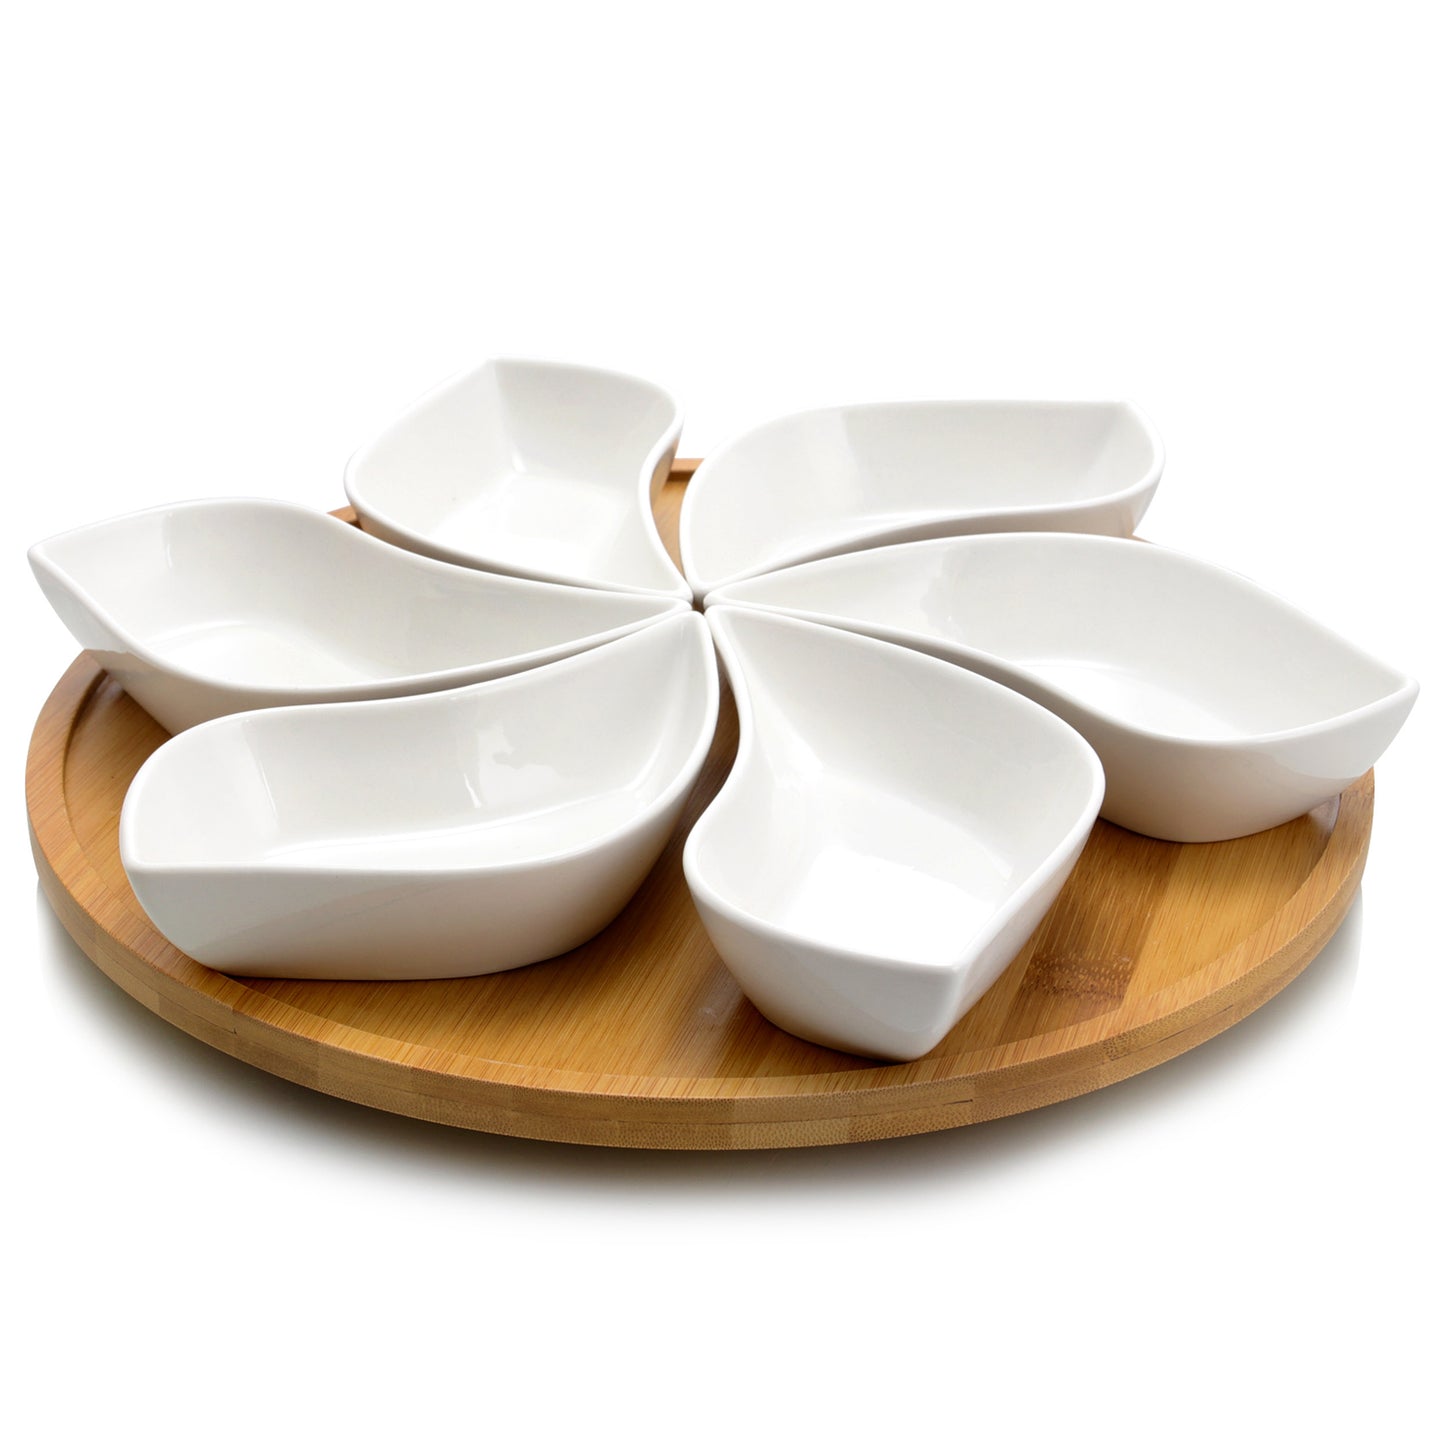 ELAMA SIGNATURE Elama Signature Modern 13.5 Inch 7pc Lazy Susan Appetizer and Condiment Server Set with 6 Unique Design Serving Dishes and a Bamboo Lazy Suzan Serving Tray